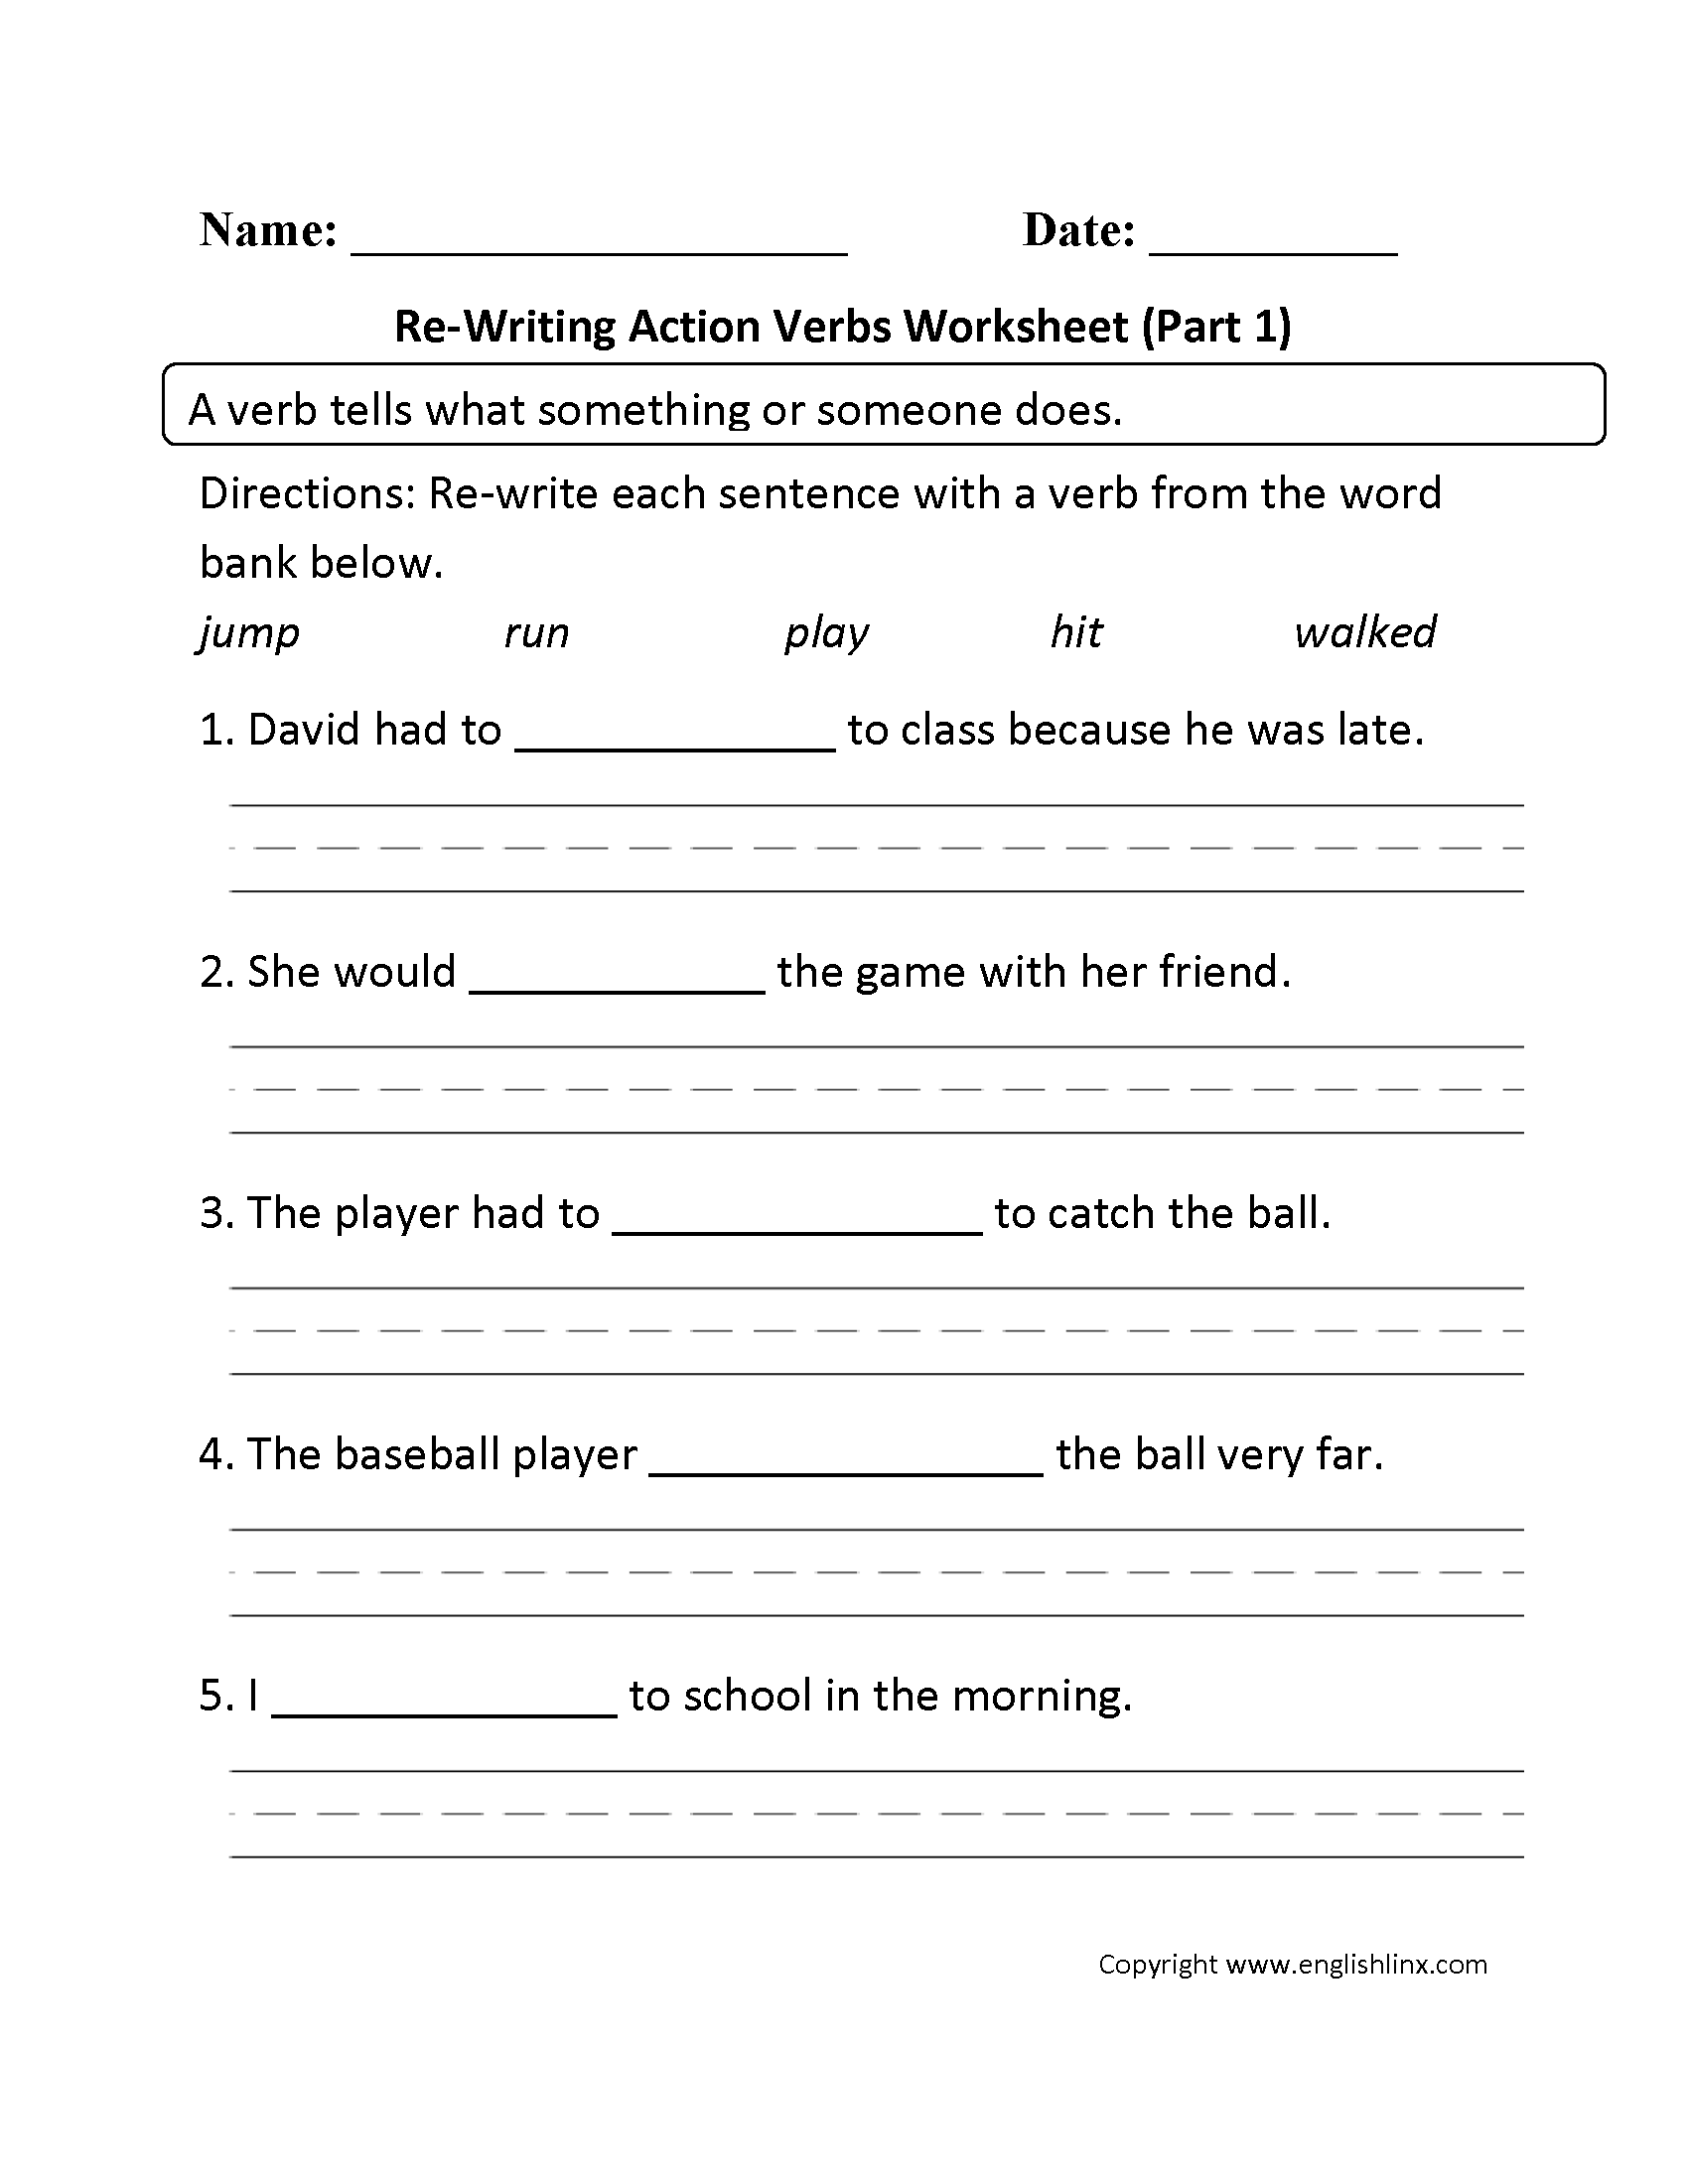 14 Best Images Of Action Verbs Worksheets 5th Grade Action And Linking Verbs Worksheets